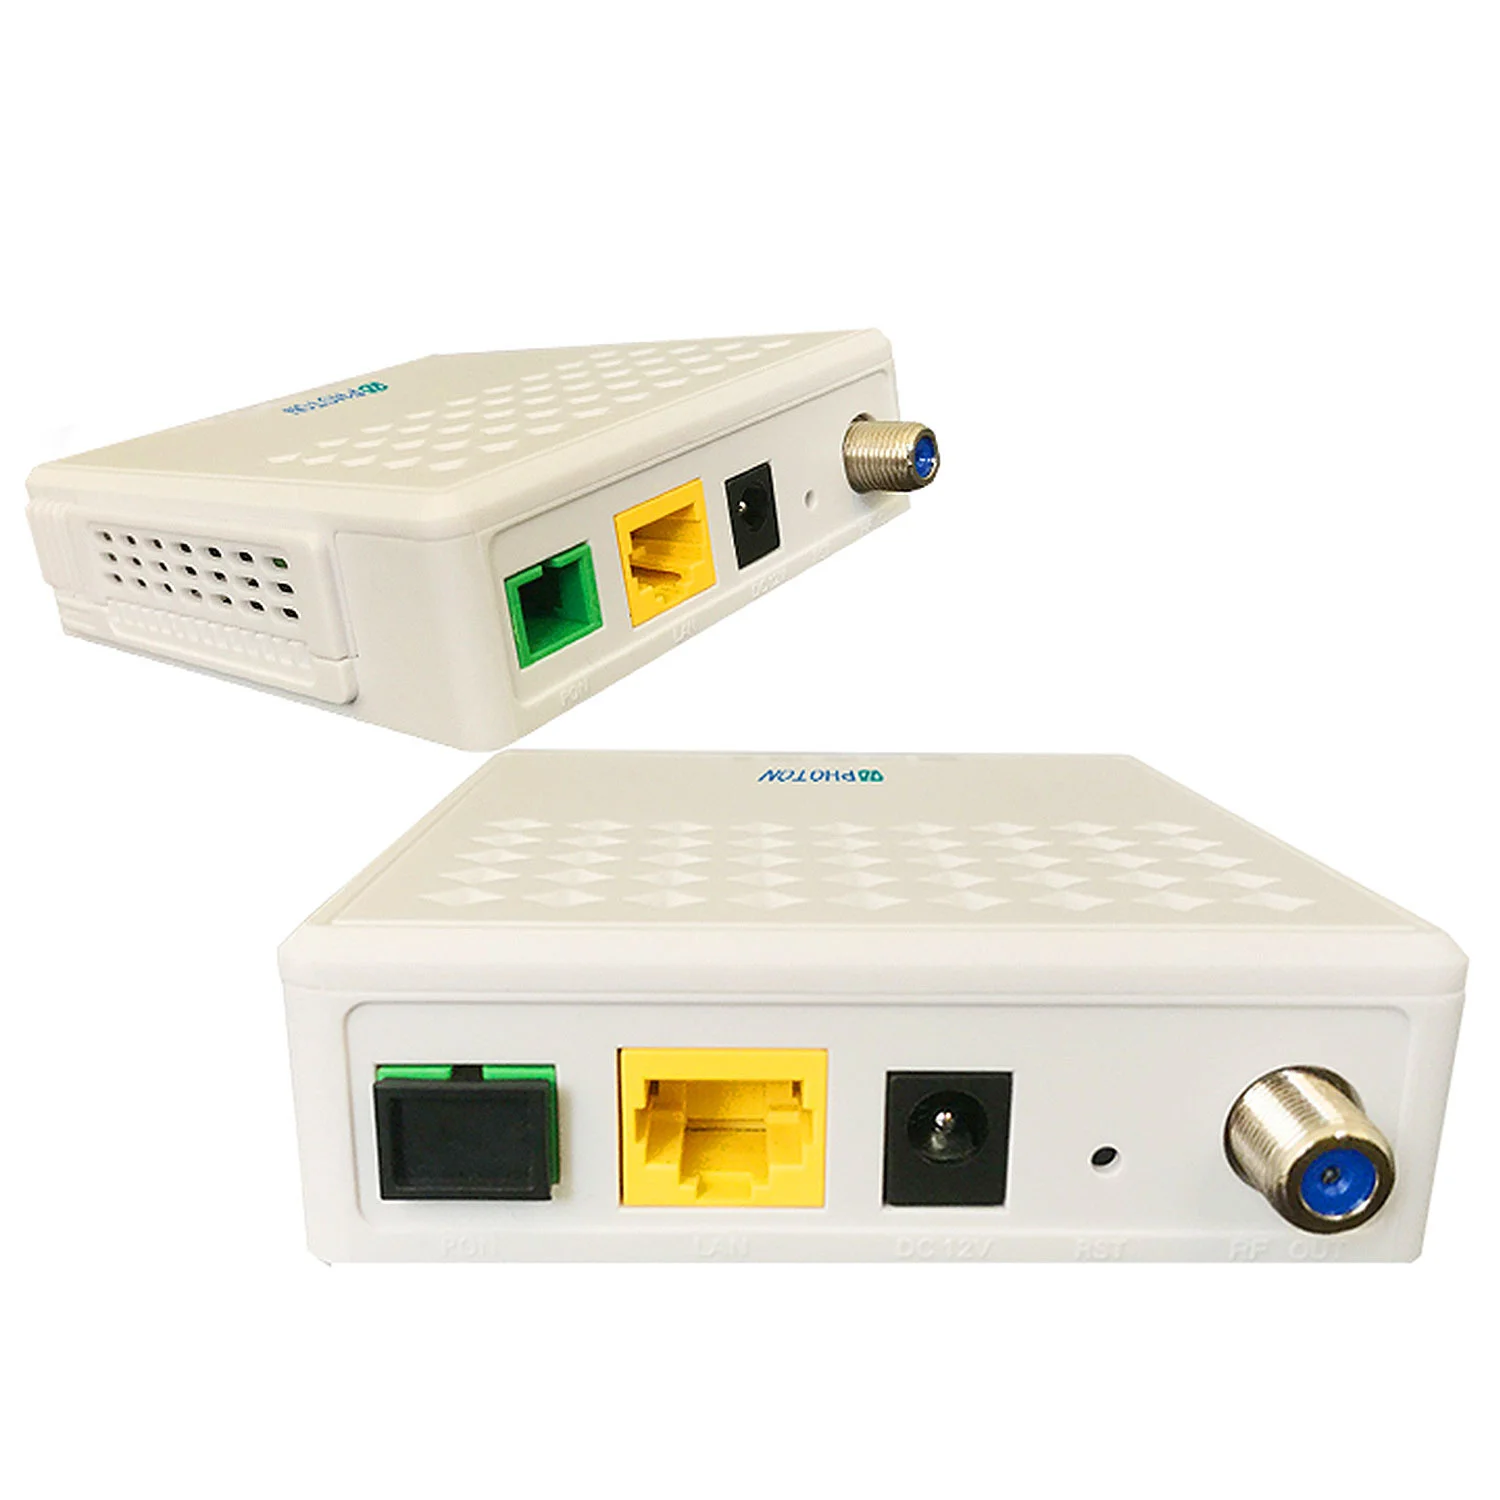 PIXLINK High quality 1GE 1CATV XPON ONT WiFi Router Modem GPON